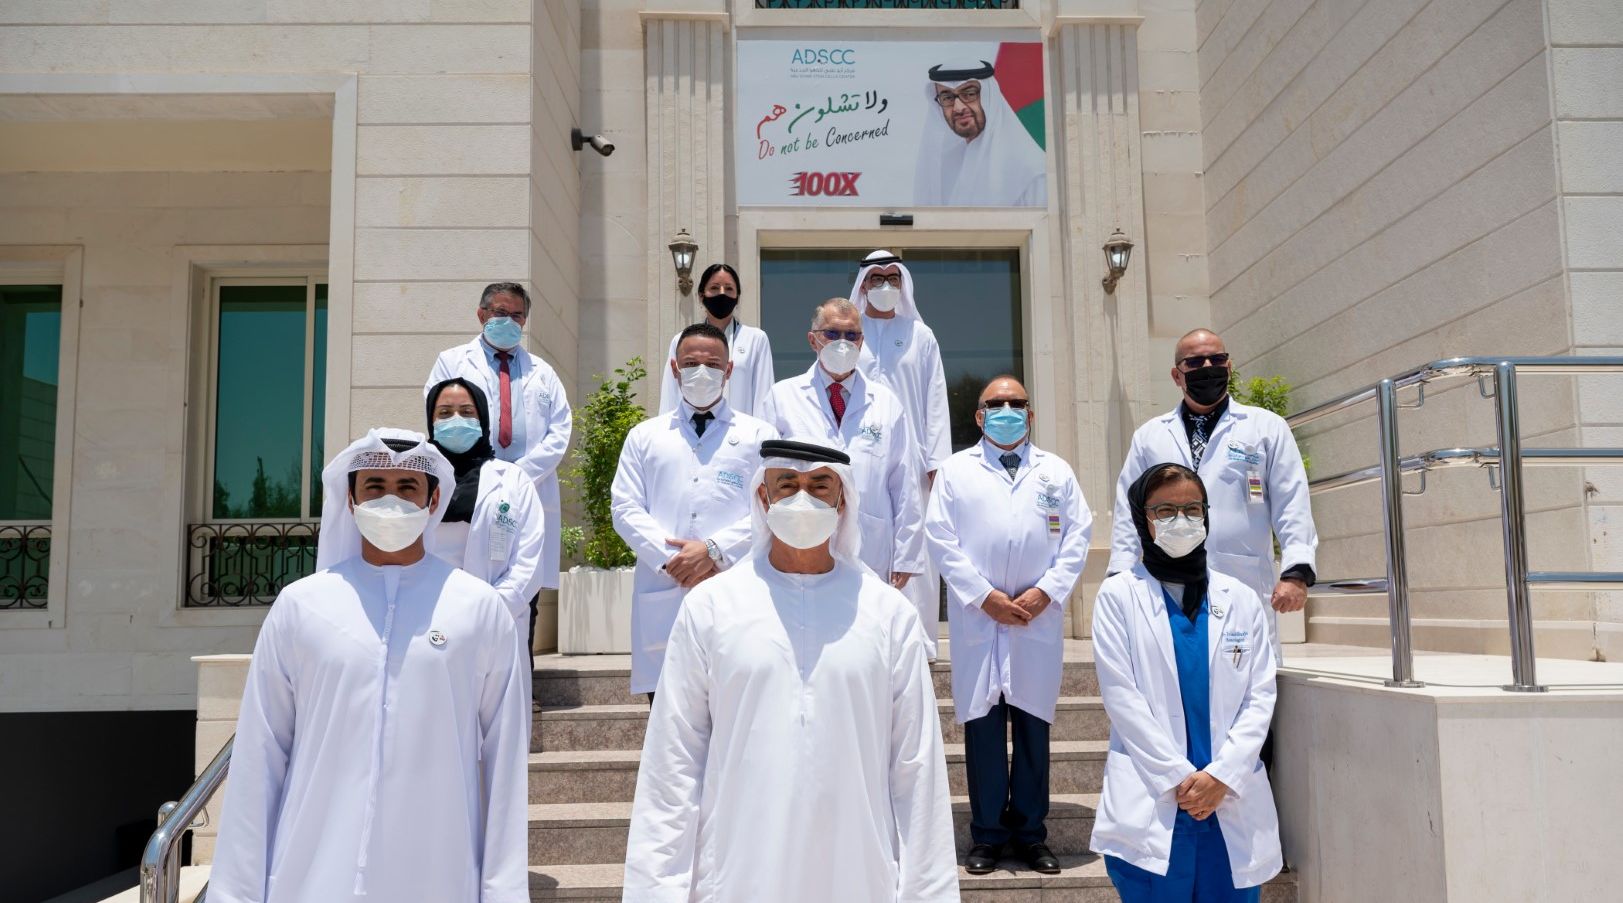 During his visit, Sheikh Mohamed hailed the contributions of the centre's doctors and researchers